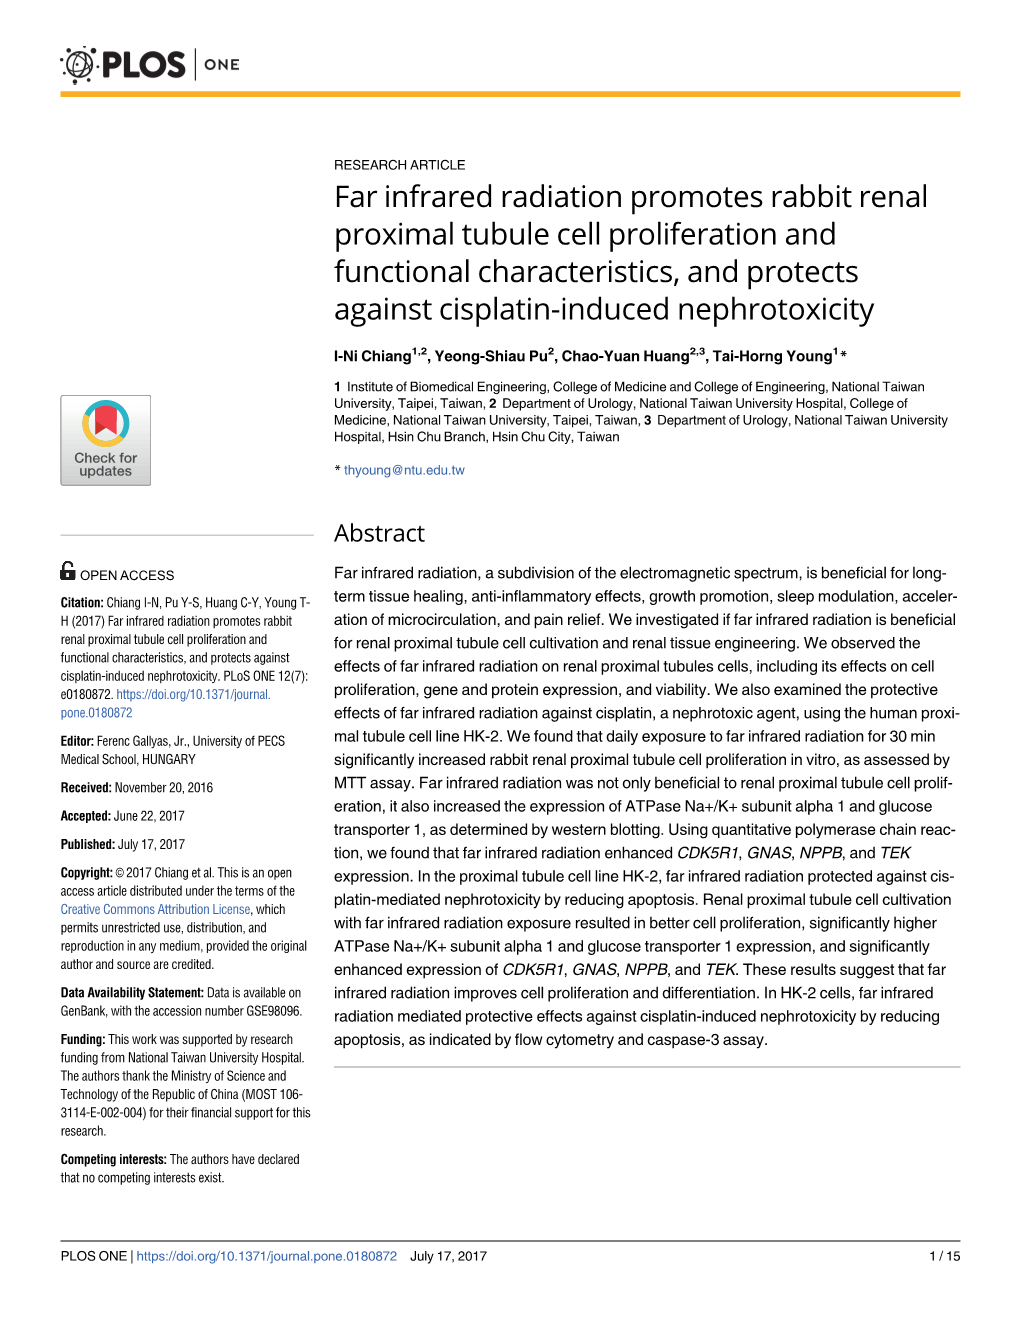 Far Infrared Radiation Promotes Rabbit Renal Proximal Tubule Cell Proliferation and Functional Characteristics, and Protects Against Cisplatin-Induced Nephrotoxicity